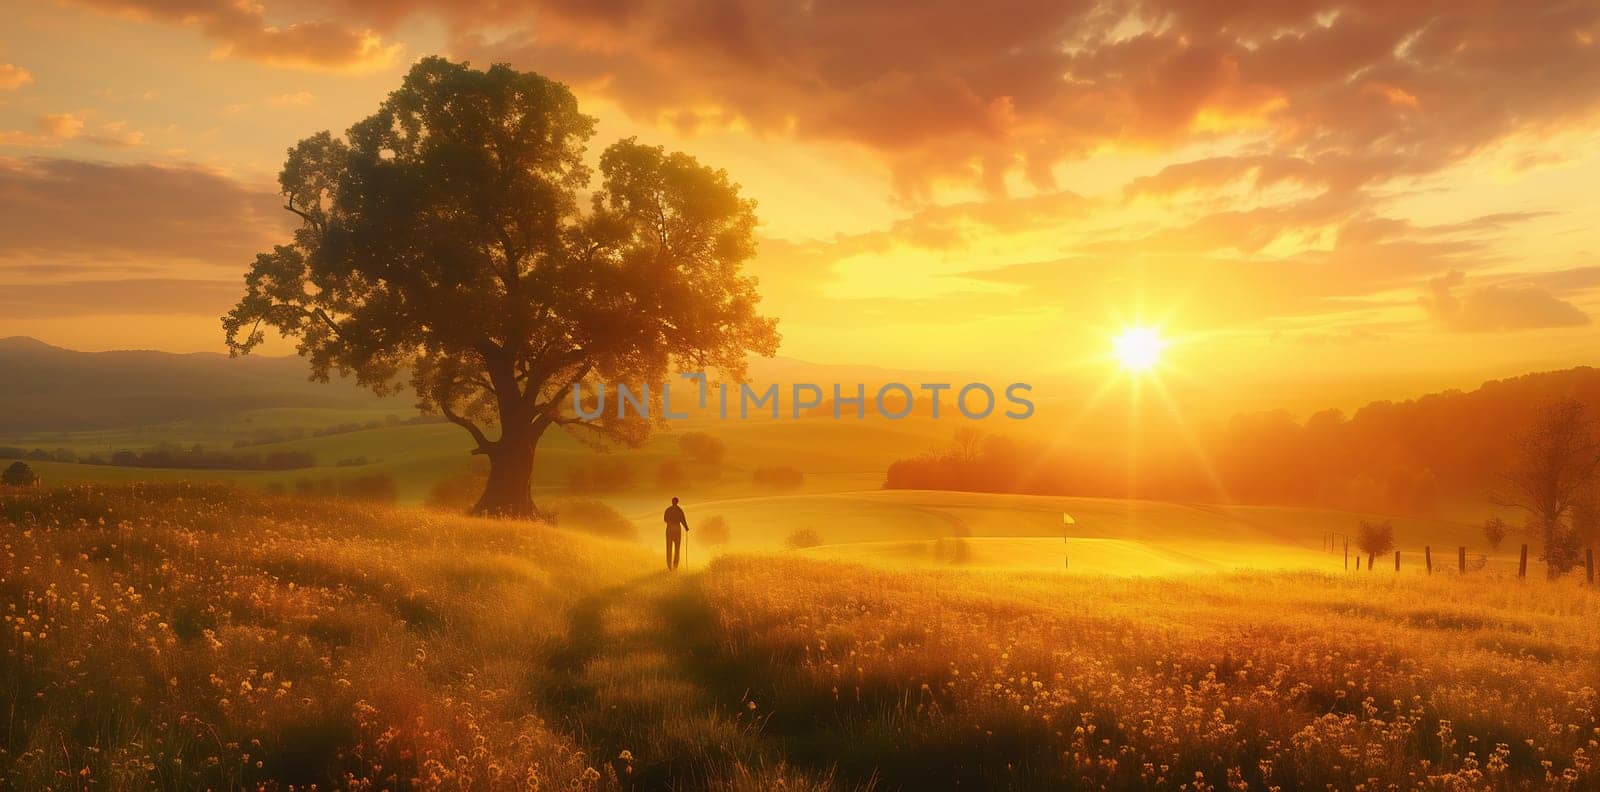 Sunset Sunrise In Misty Autumn Meadow Landscape With Lonely Tree. Sun Sunshine With Natural Sunlight Through Wood Tree In Morning. Scenic View. Autumn Nature. Panoramic View. by Andelov13